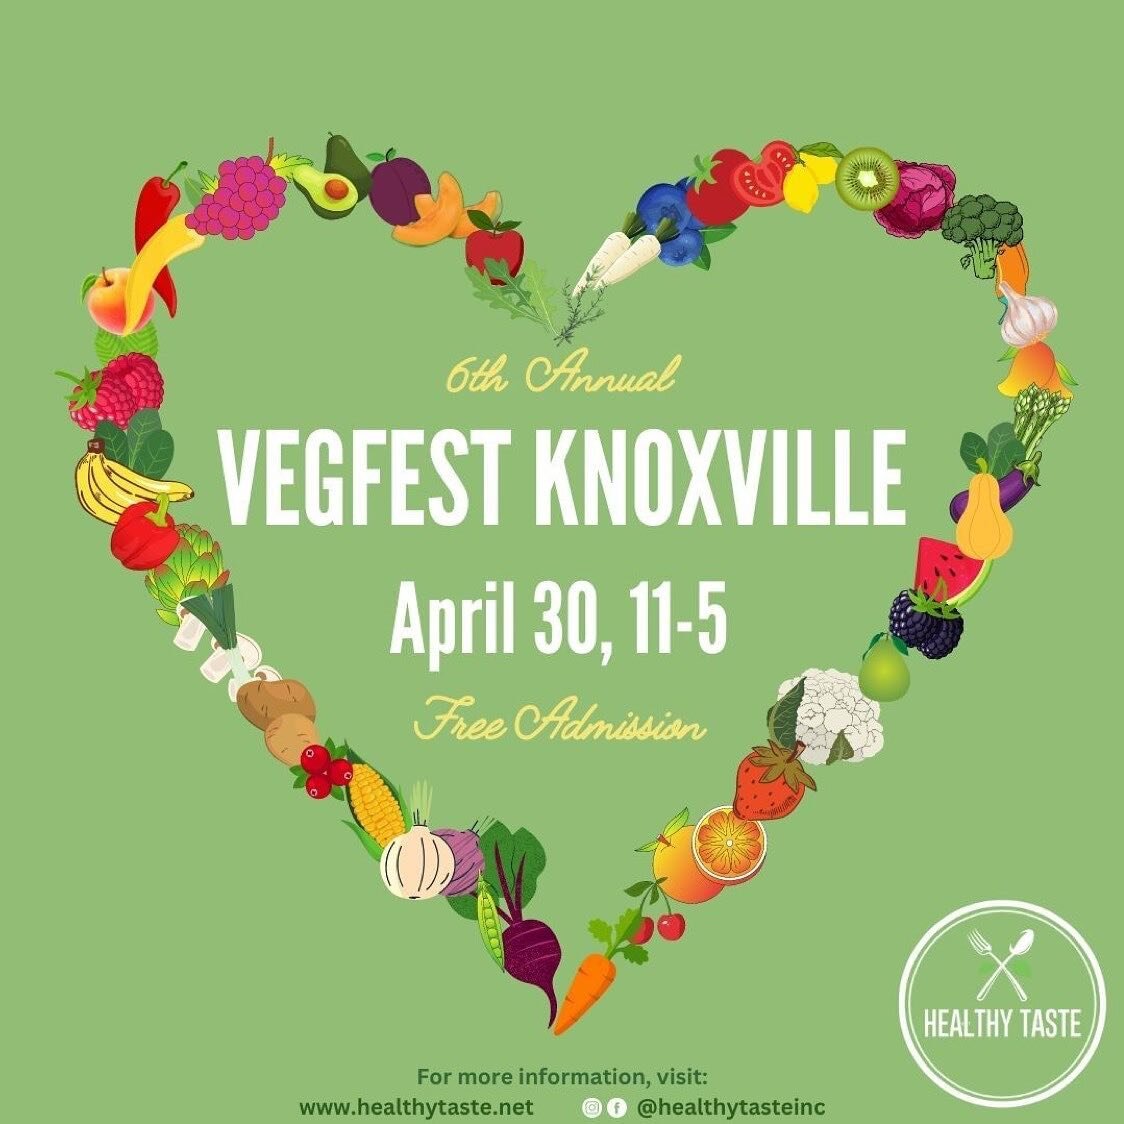 We are so excited for the @healthytasteinc Vegfest. Definitely follow then for more info and save the date!!! 

Info from their original post below. 
&bull;
Time for our Knoxville VEGFEST!

-Fantastic vegan food and health product/service vendors

-C